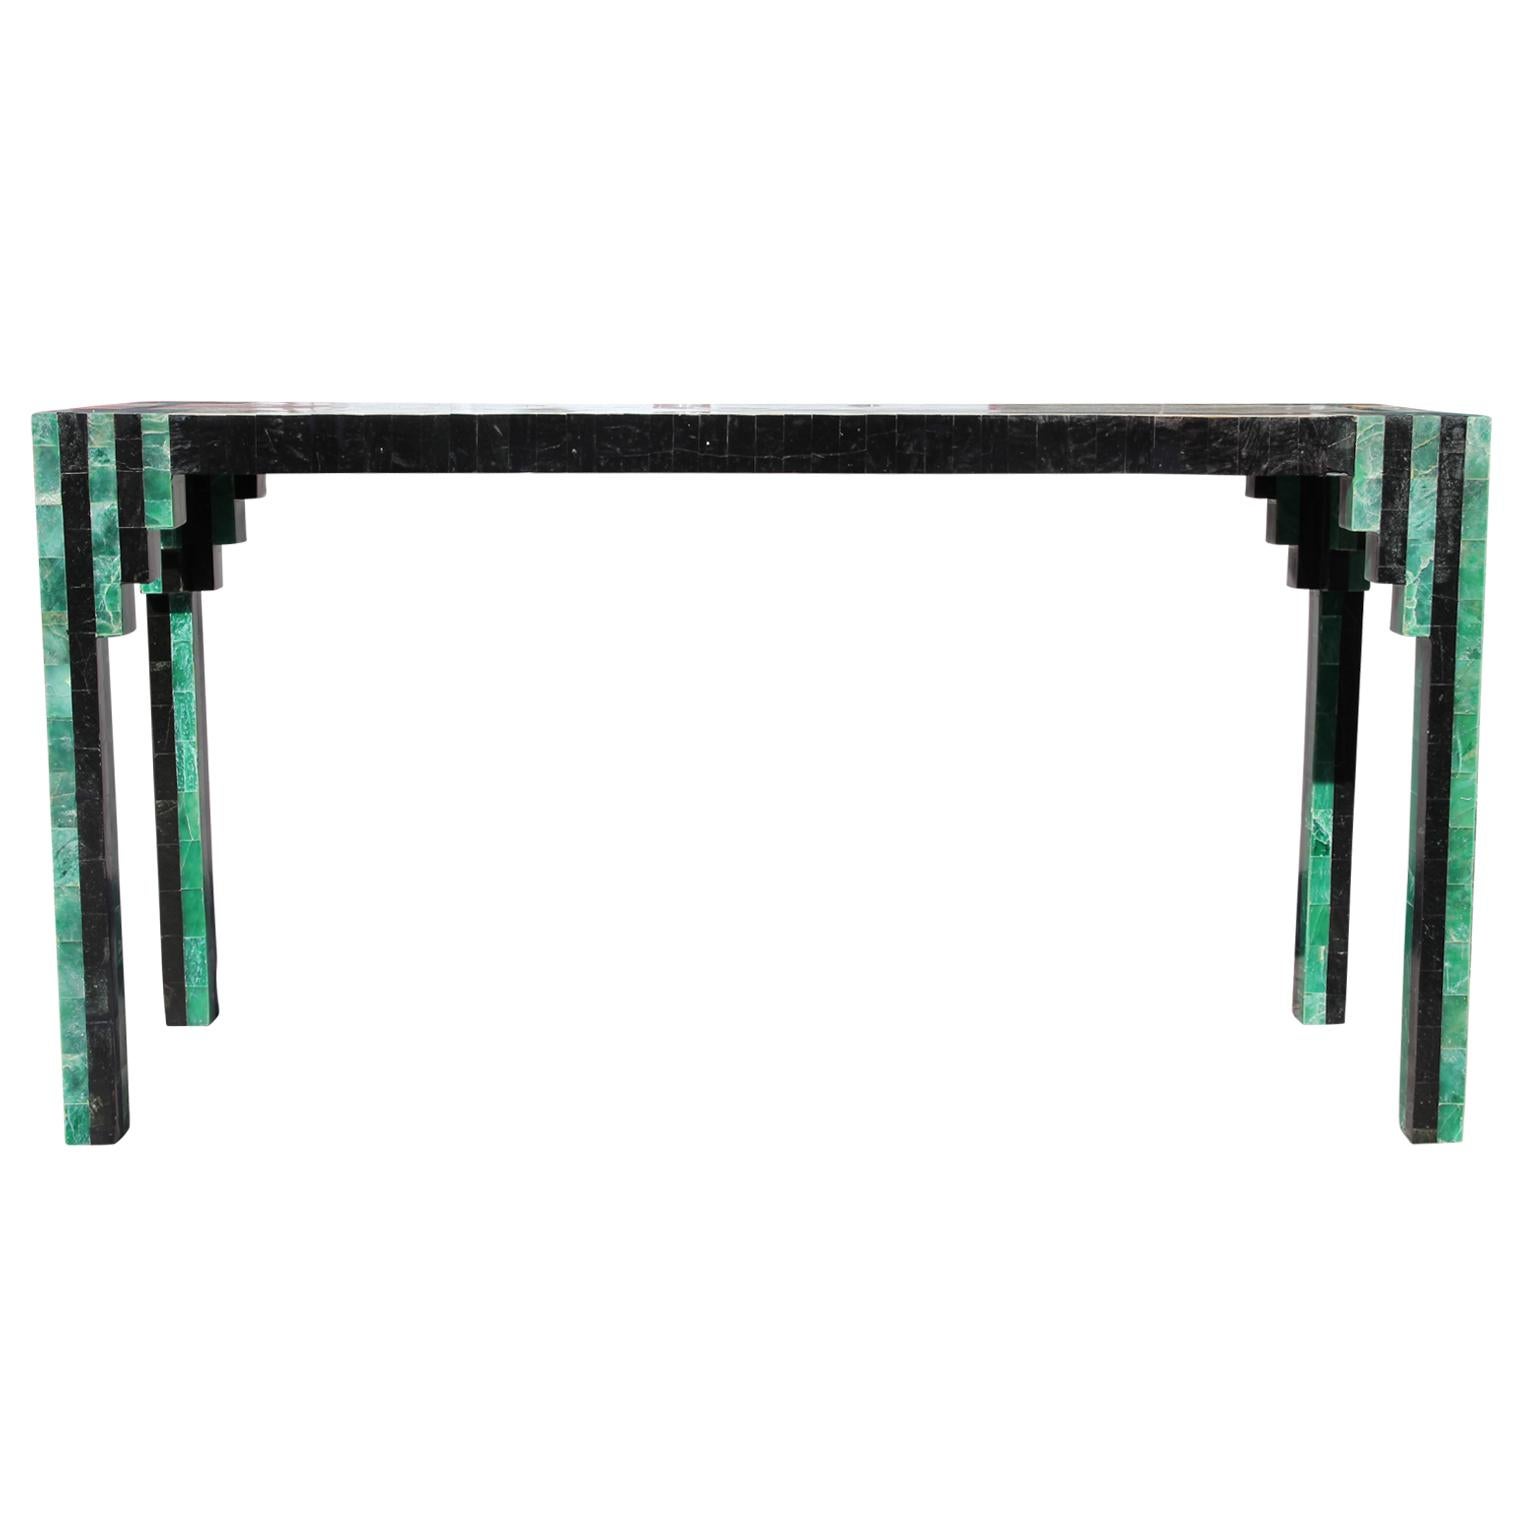 Stunning geometric deco tessellated marble Karl Springer style console table, circa 1970s made in the Philippines. Very nice vintage condition.